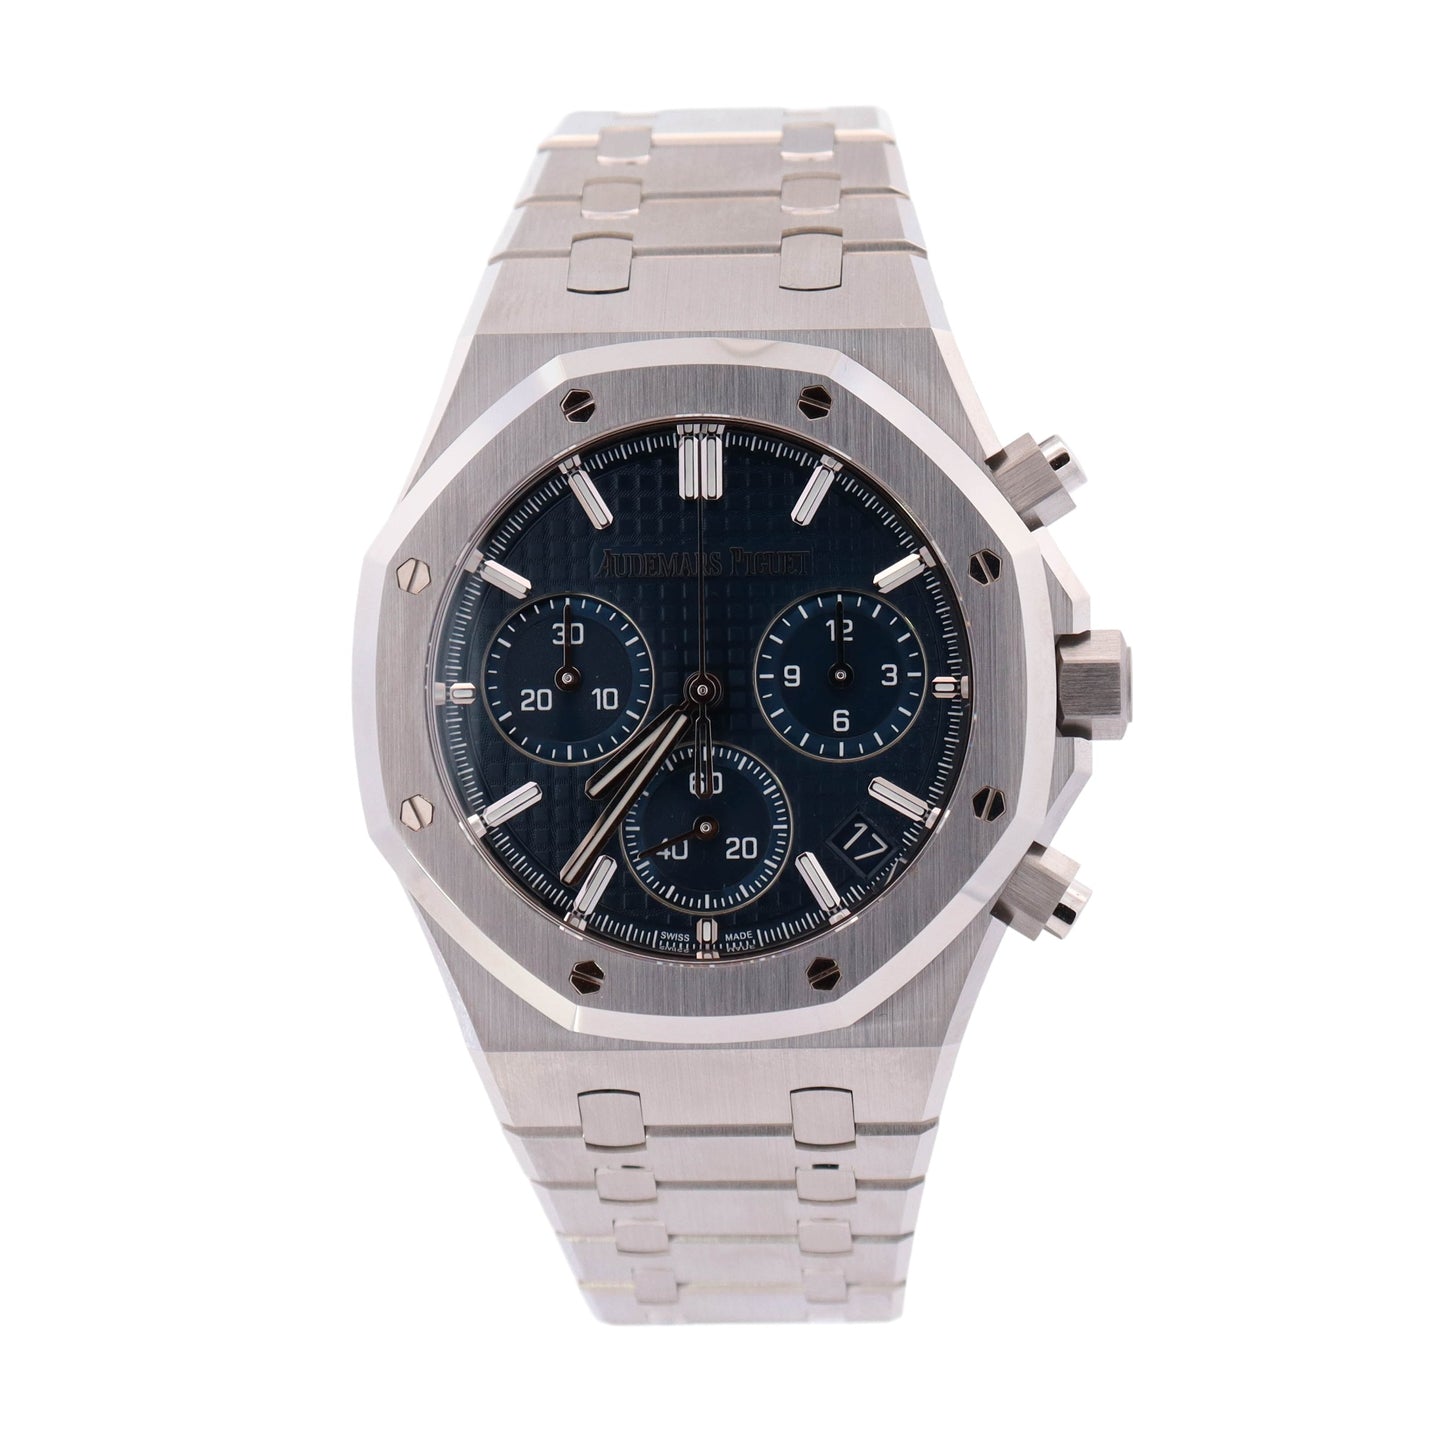 Audemars Piguet Royal Oak Stainless Steel 42mm Blue Chronograph Dial Watch Reference# 26240ST - Happy Jewelers Fine Jewelry Lifetime Warranty